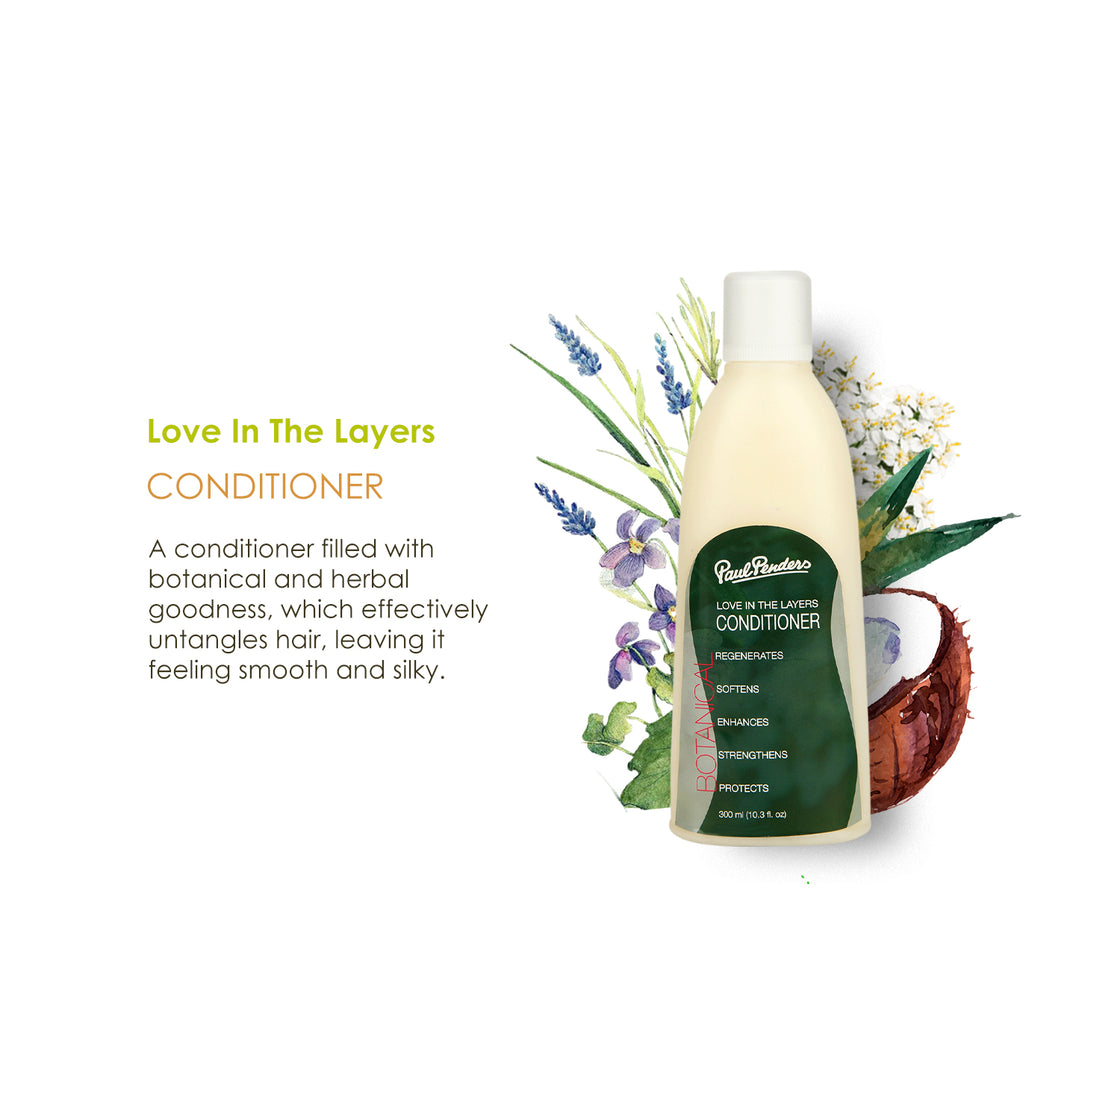 Paul Penders Love in the Layers Natural Conditioner For Soft, Shiny & Fuller Hair | Damaged Hair Repair & Treatment 300ml